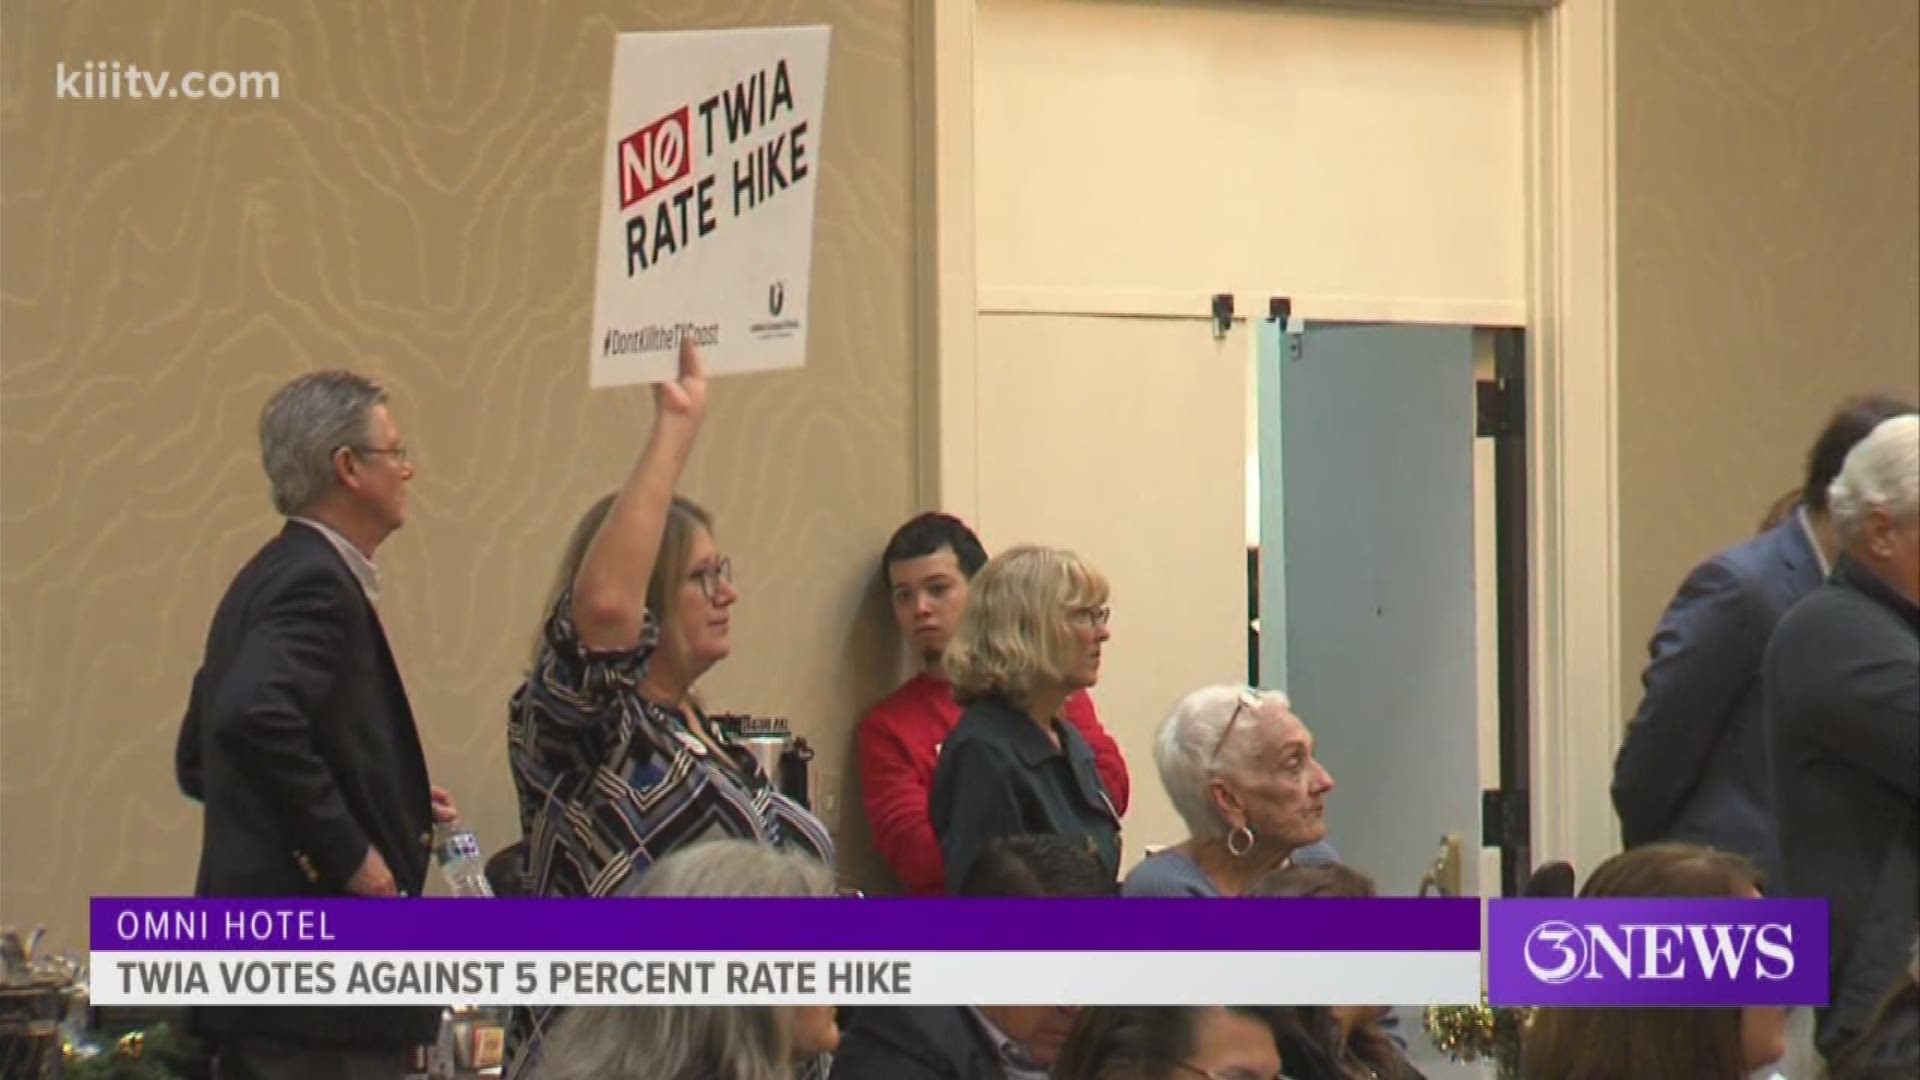 A meeting was held at the Omni Hotel in downtown Corpus Christi to discuss the proposed rate hike.